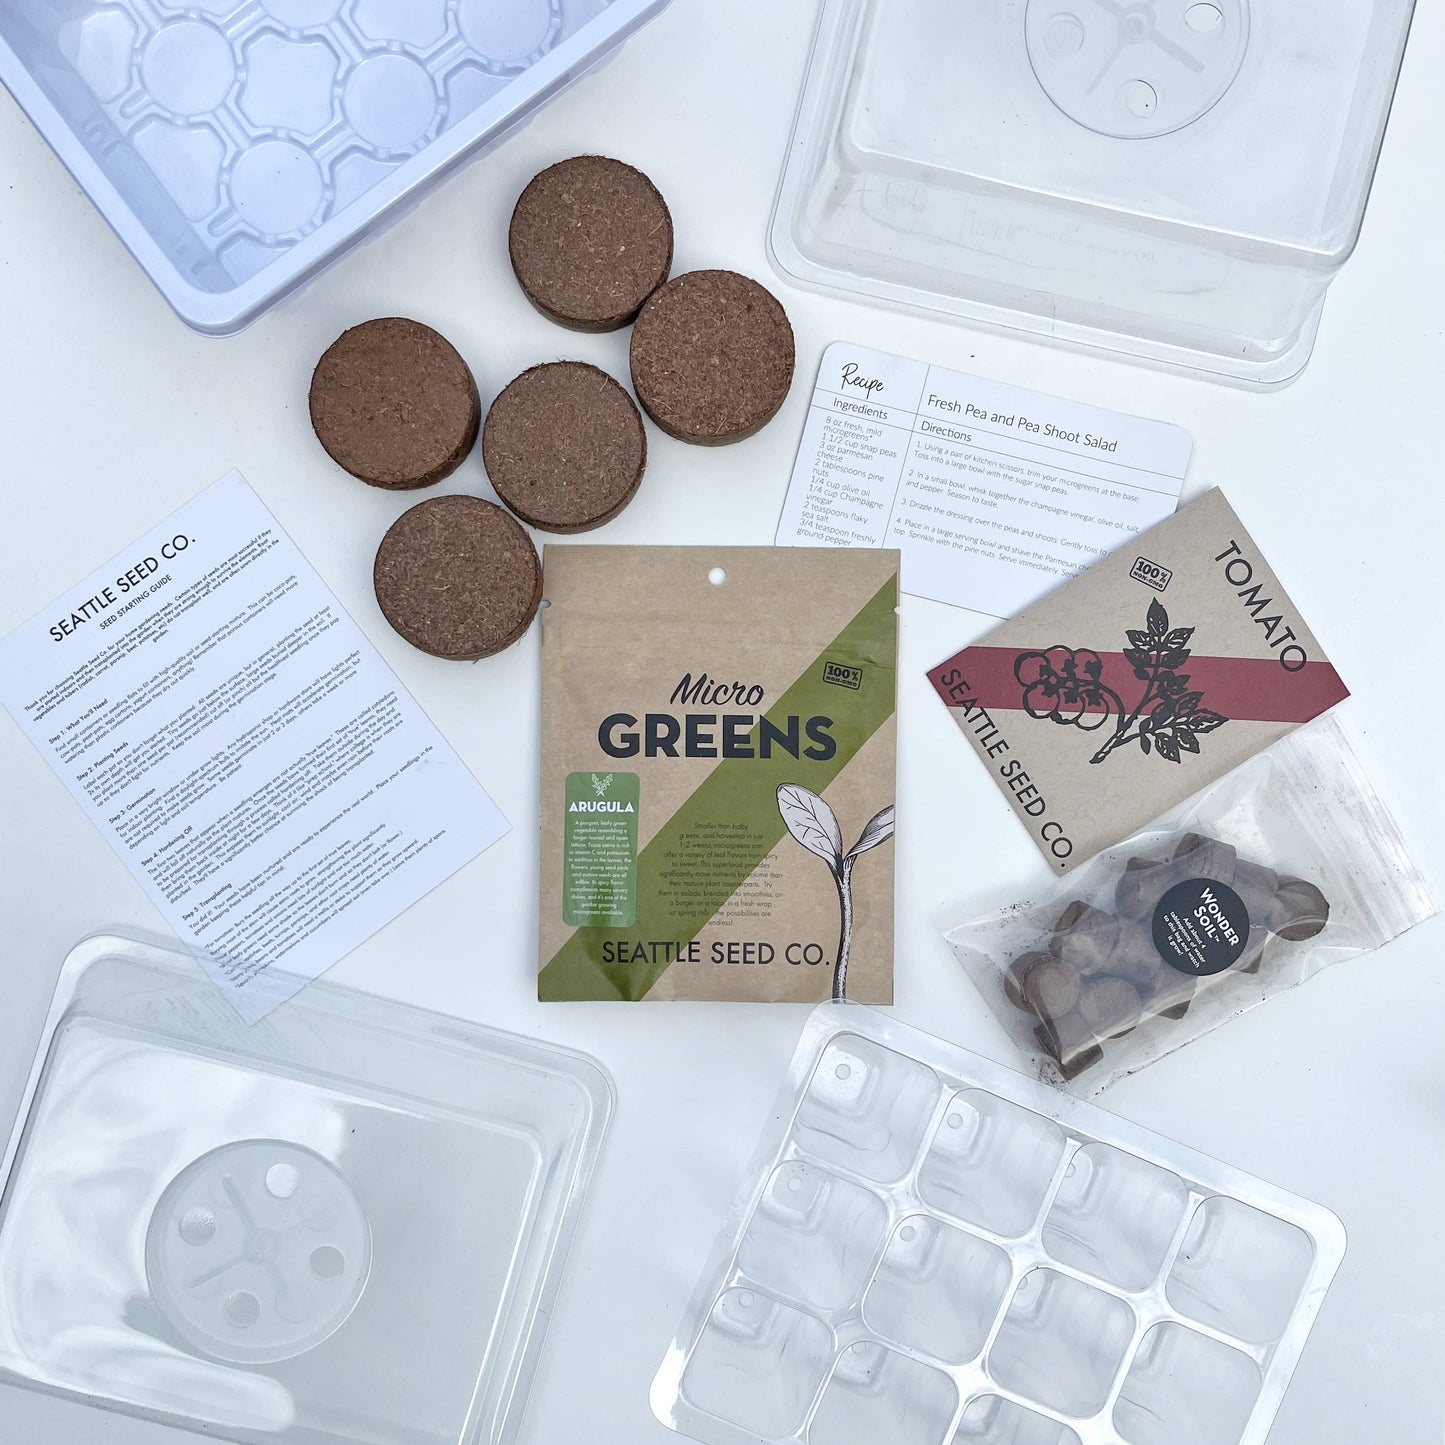 Seattle Seed Co. - Microgreens and Seed-Starting Kit